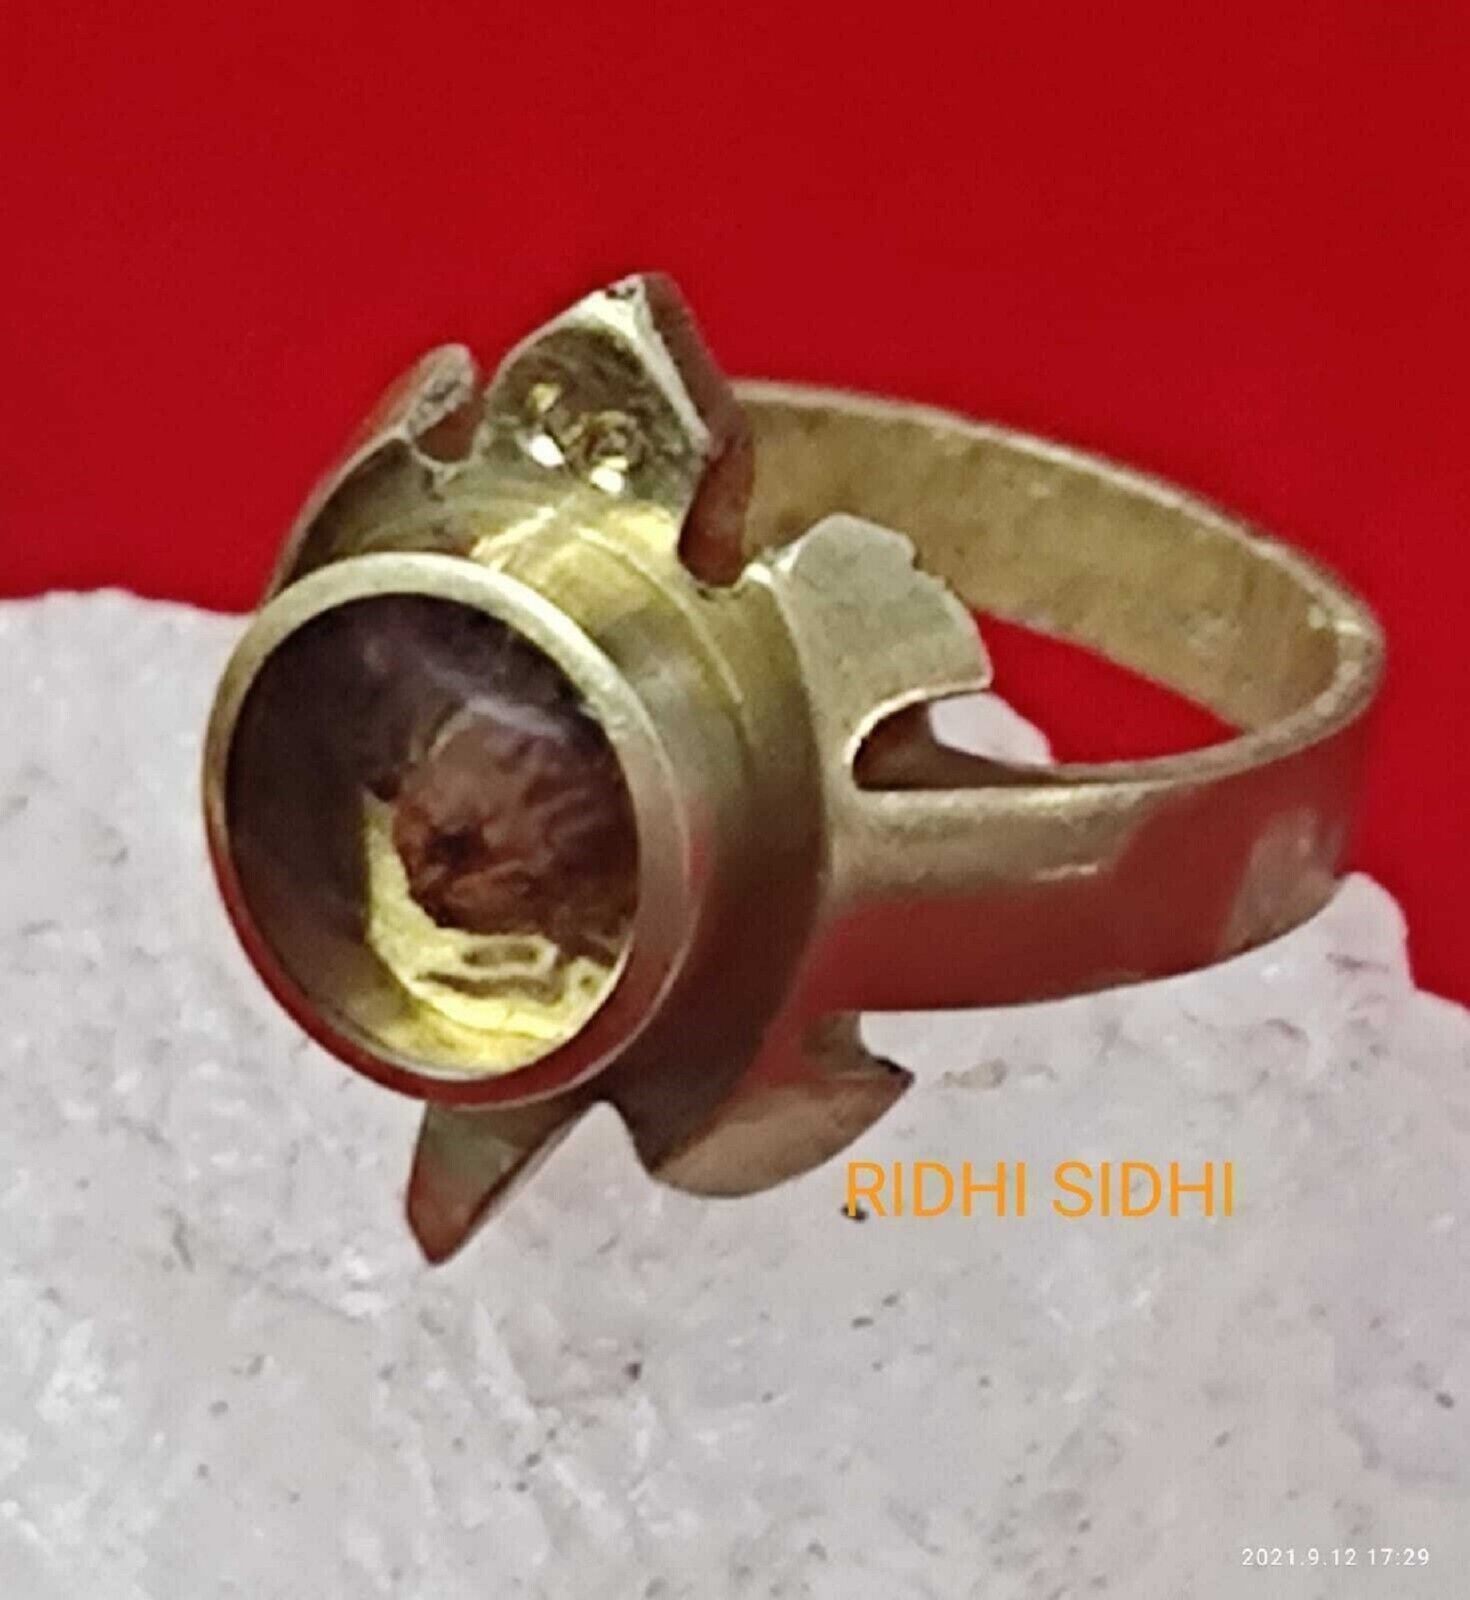 AGHORI SIDH POWERFUL ENERGIZED KING Warrior RING OCCULT CHARISMA STRESS FREE